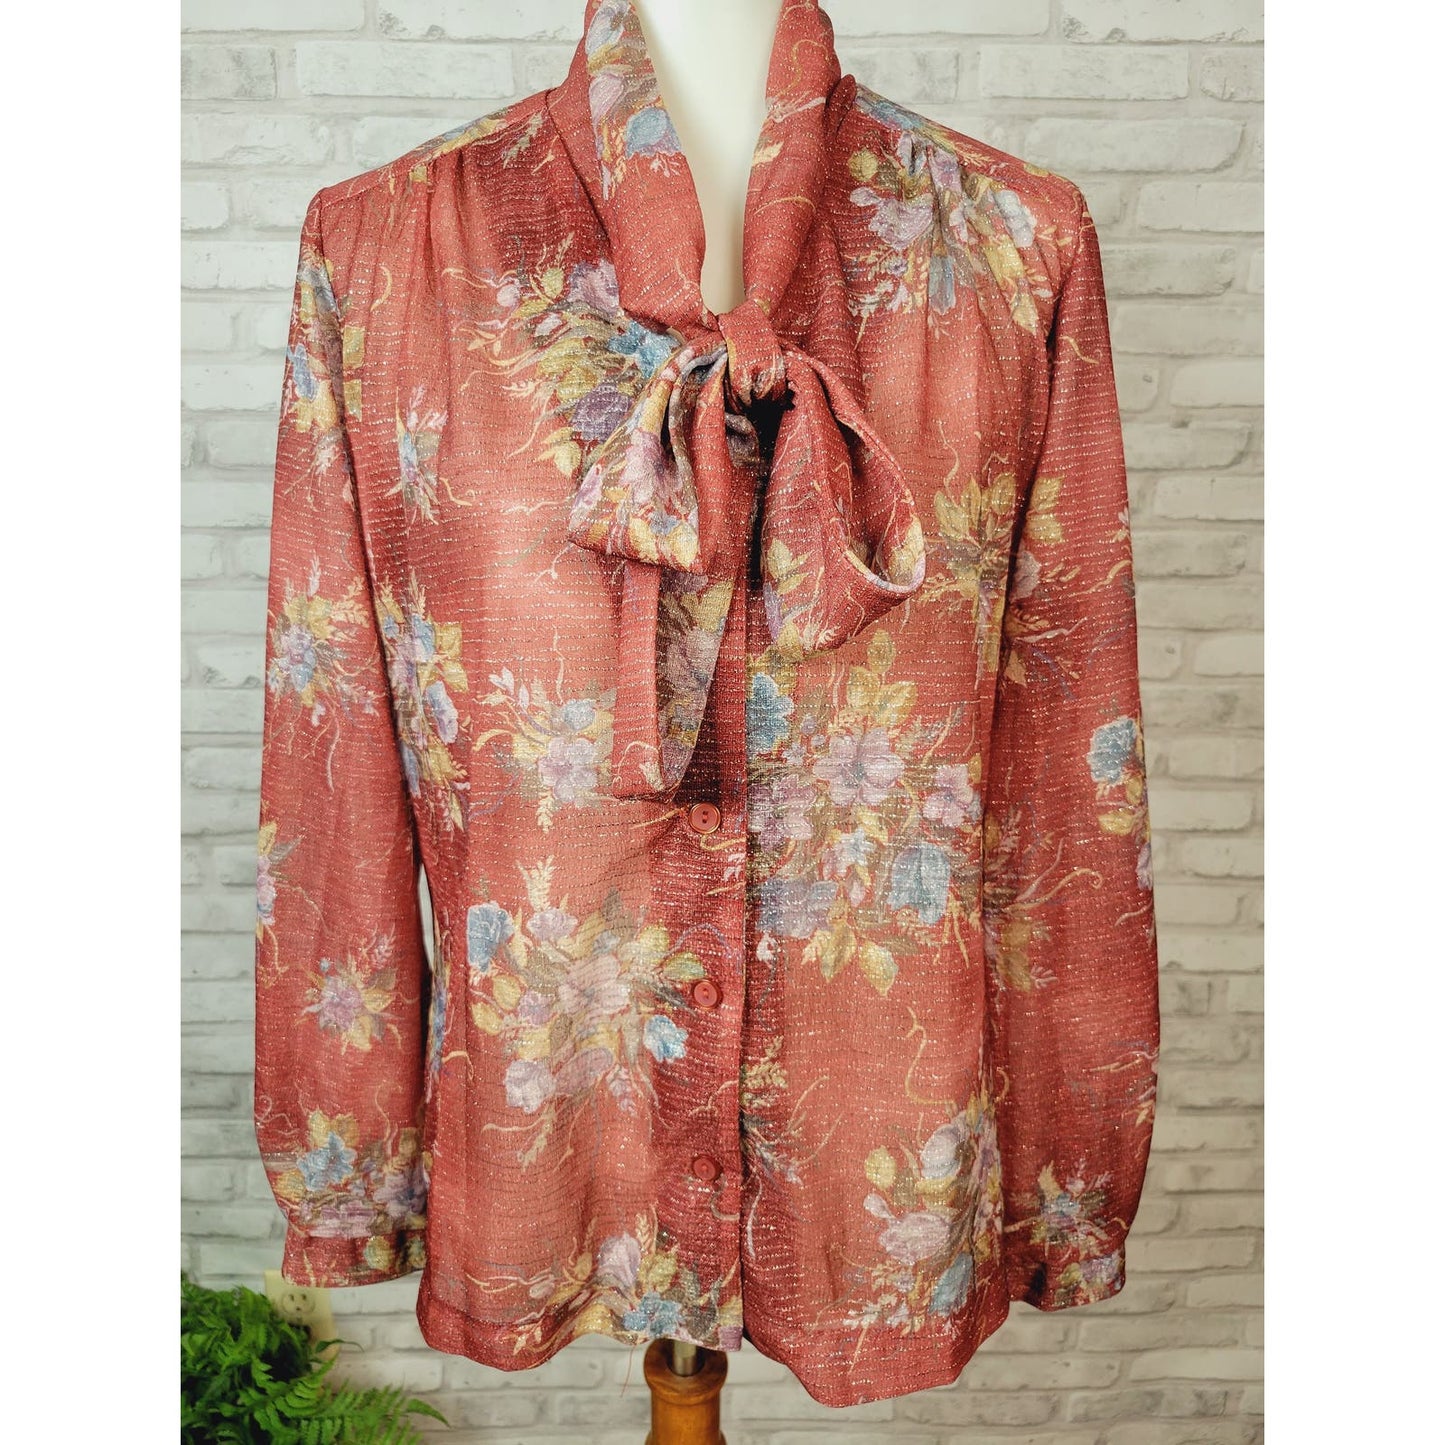 Secretary bow blouse size 14 Prince of Dallas semi-sheer rust floral 1970s vintage